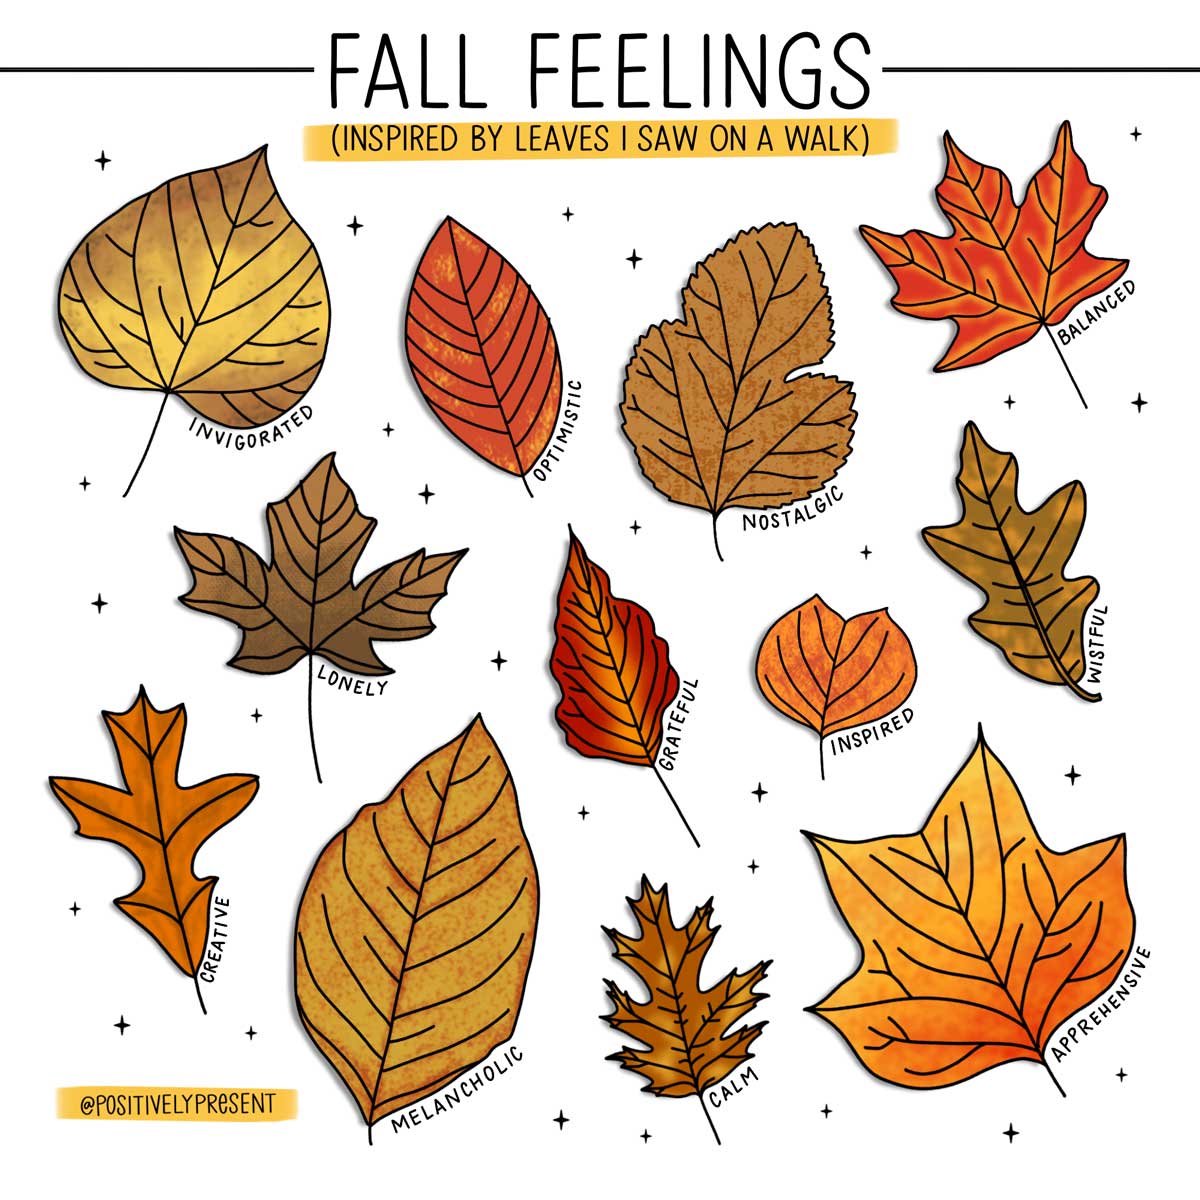 flatlay drawing of fall leaves depicts feelings for each one.